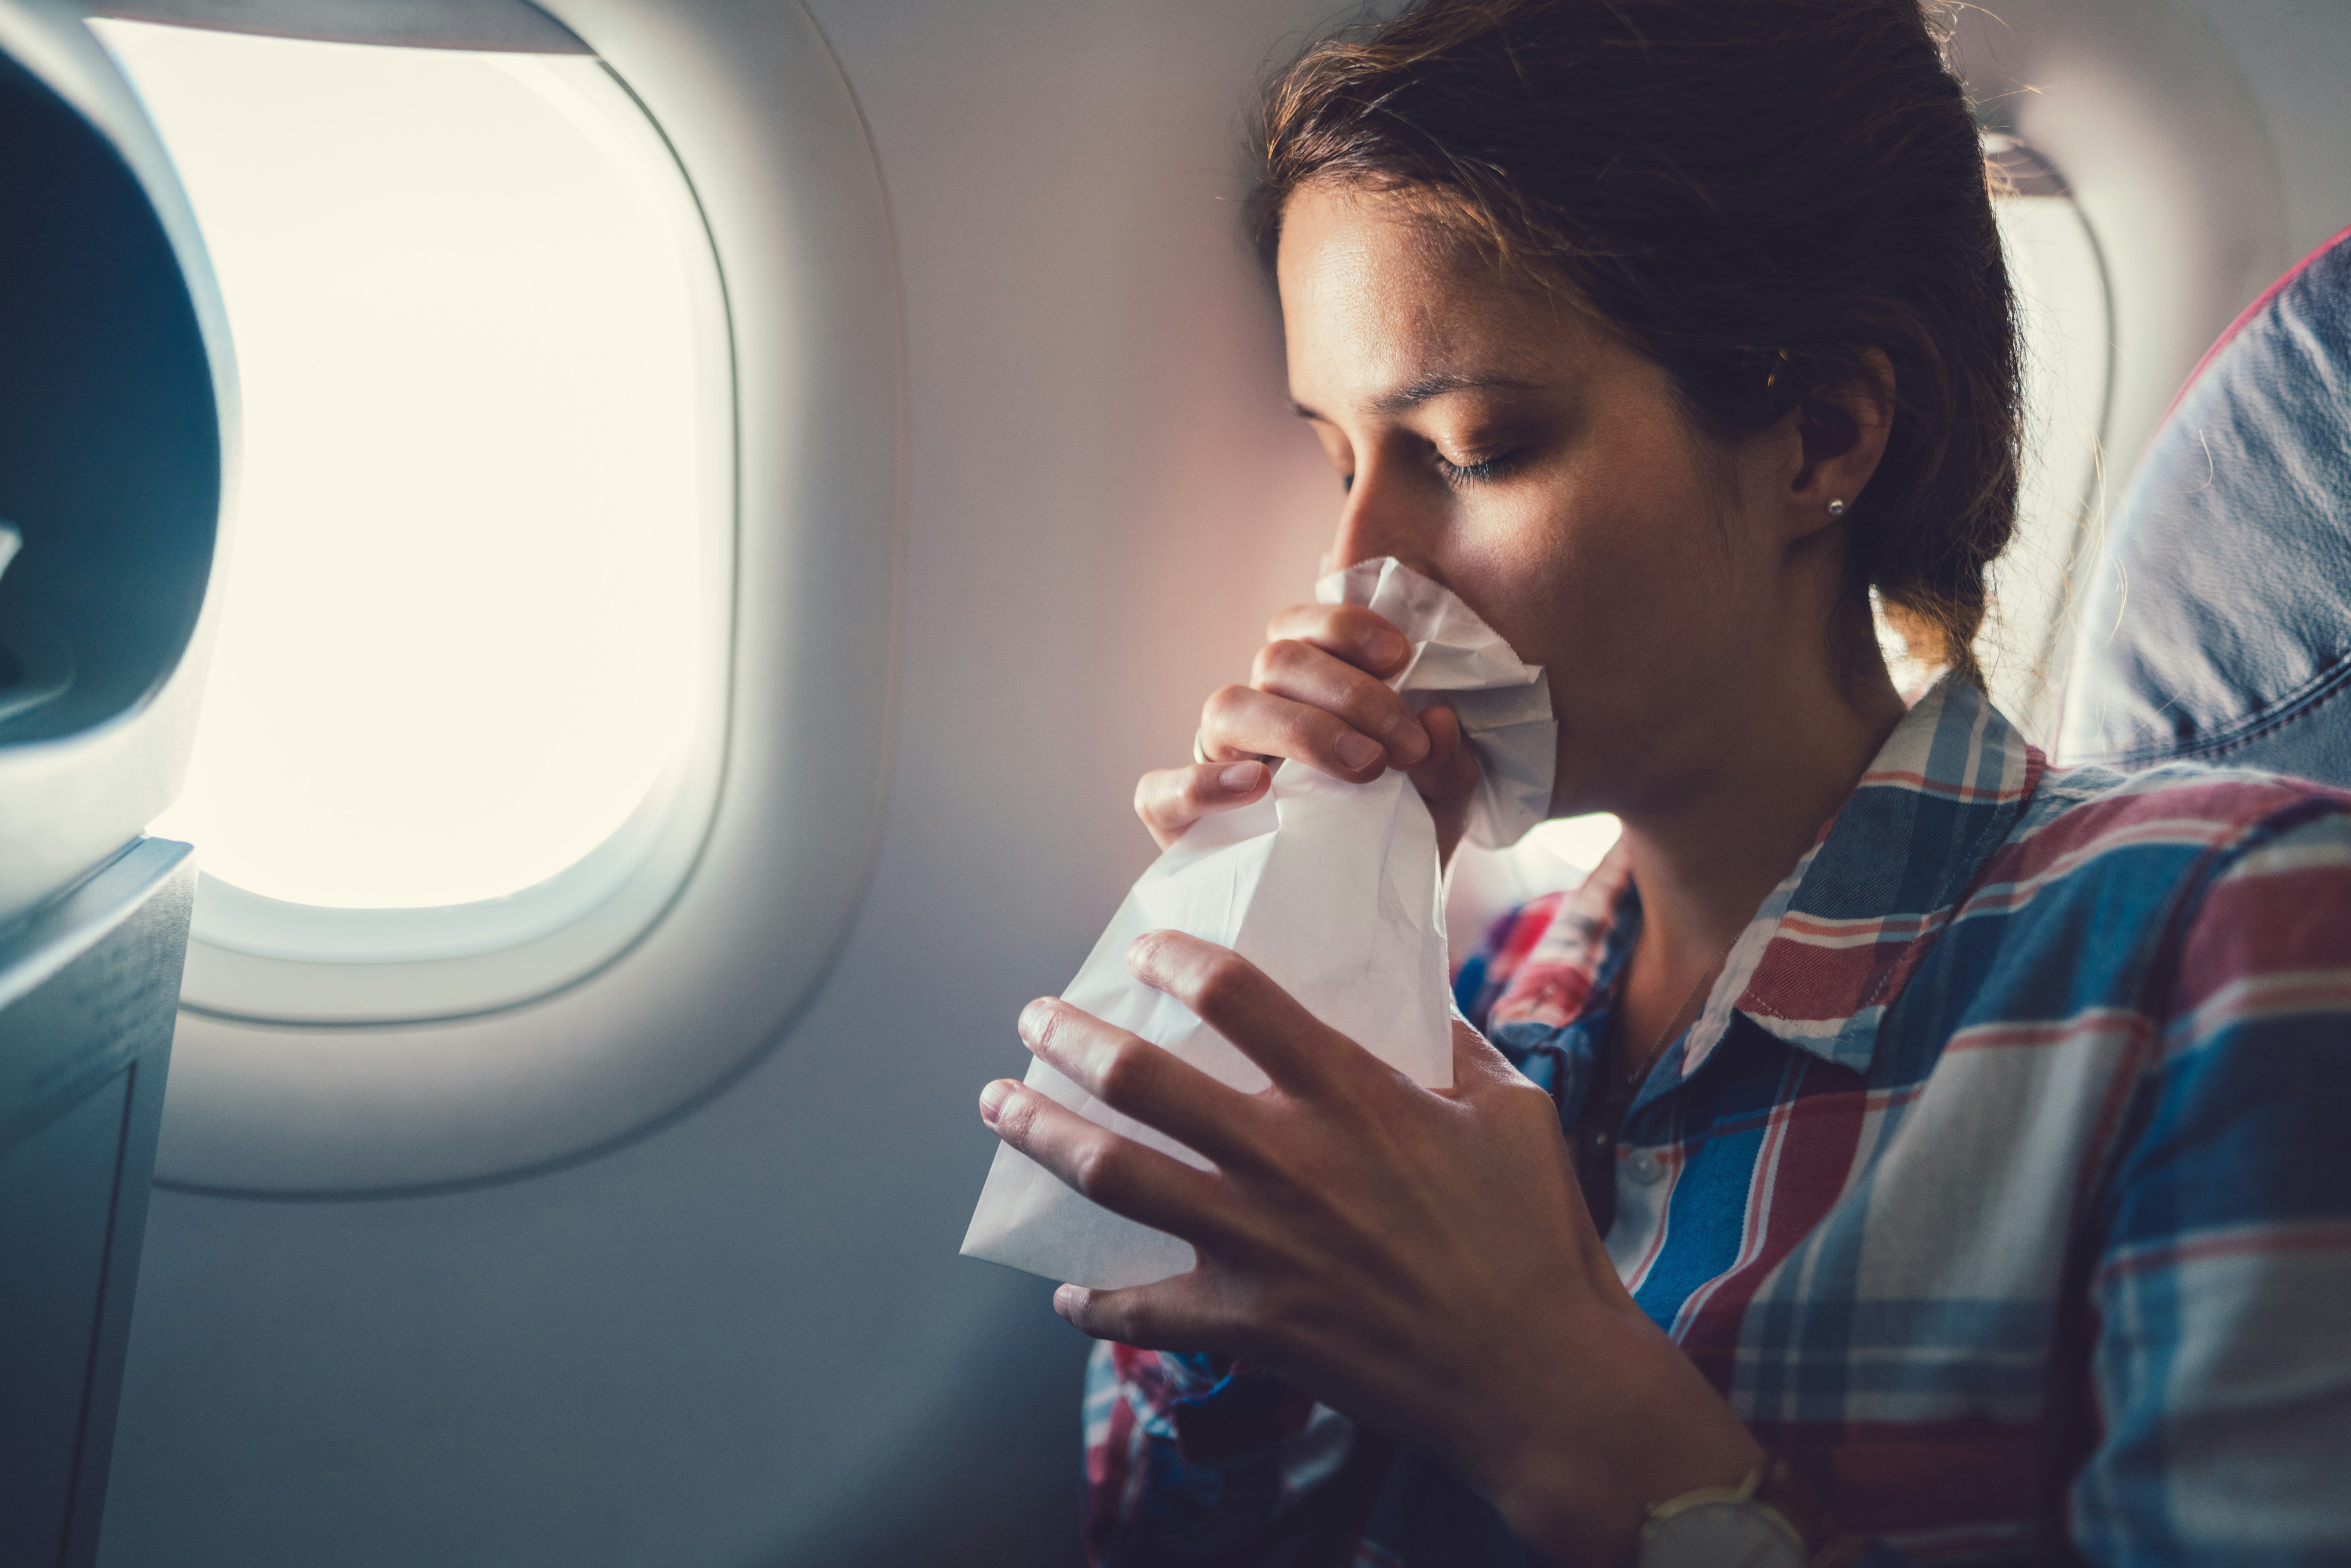 A woman sitting in a window seat on an airplane breathes into a white paper bag